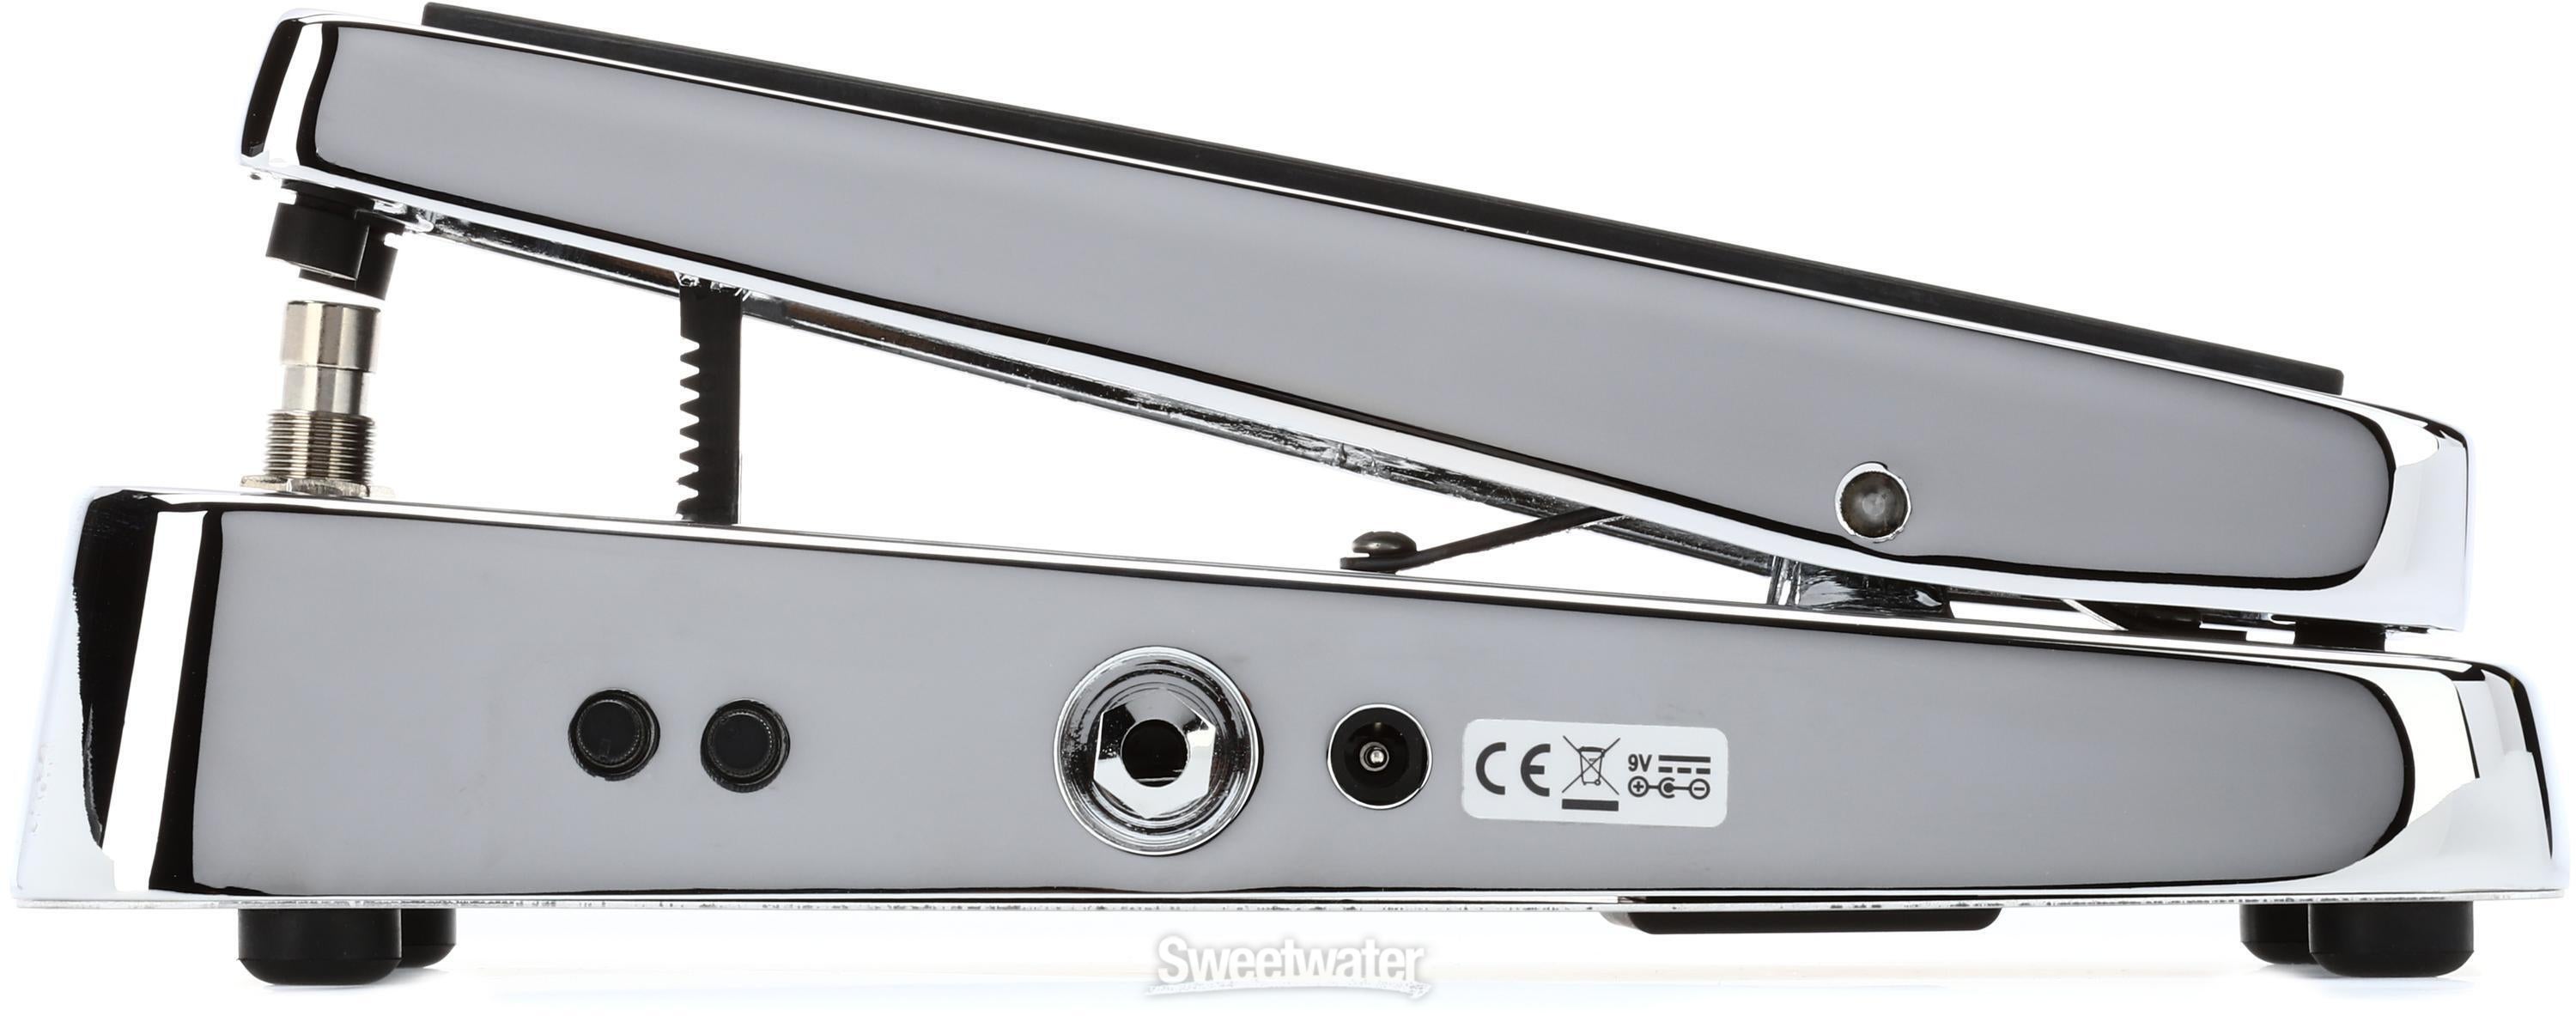 Dunlop 535Q-C Cry Baby 535Q Multi-wah Pedal - Chrome | Sweetwater